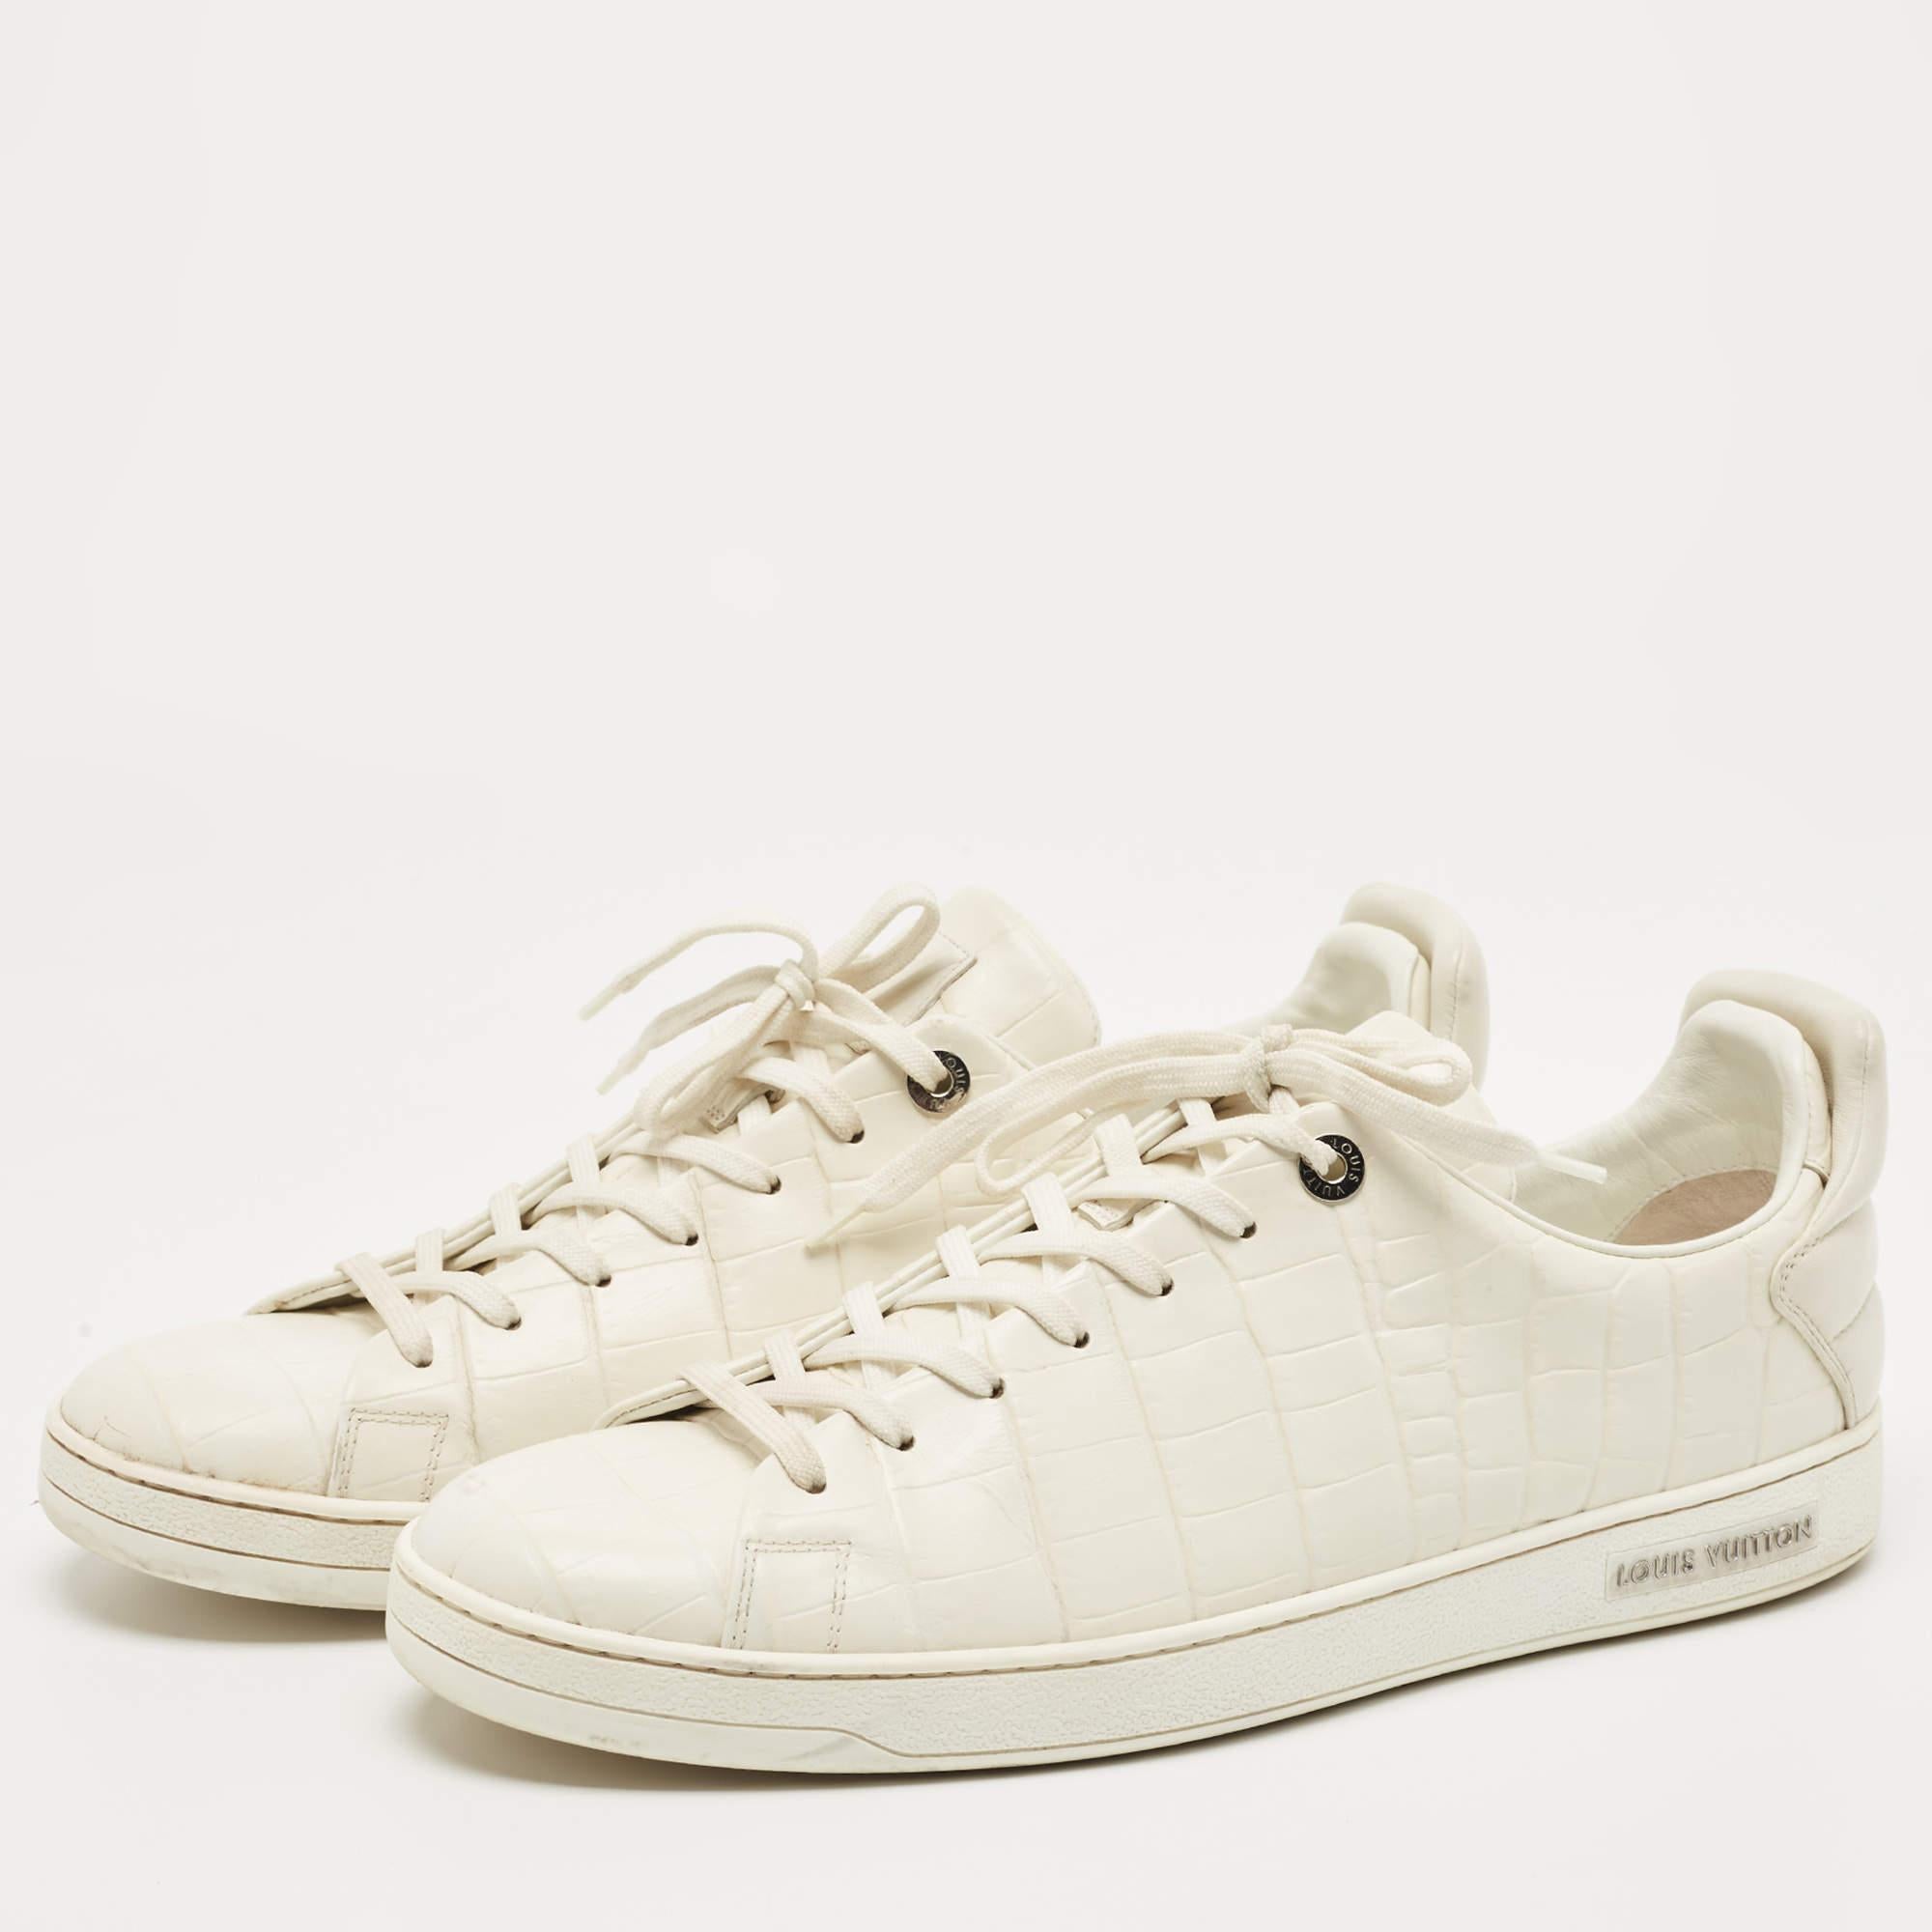 You'll love wearing these Frontrow sneakers from Louis Vuitton! The white sneakers are crafted from croc-embossed leather and feature round toes and lace-ups on the vamps. They come equipped with comfortable leather lined insoles and tough soles.